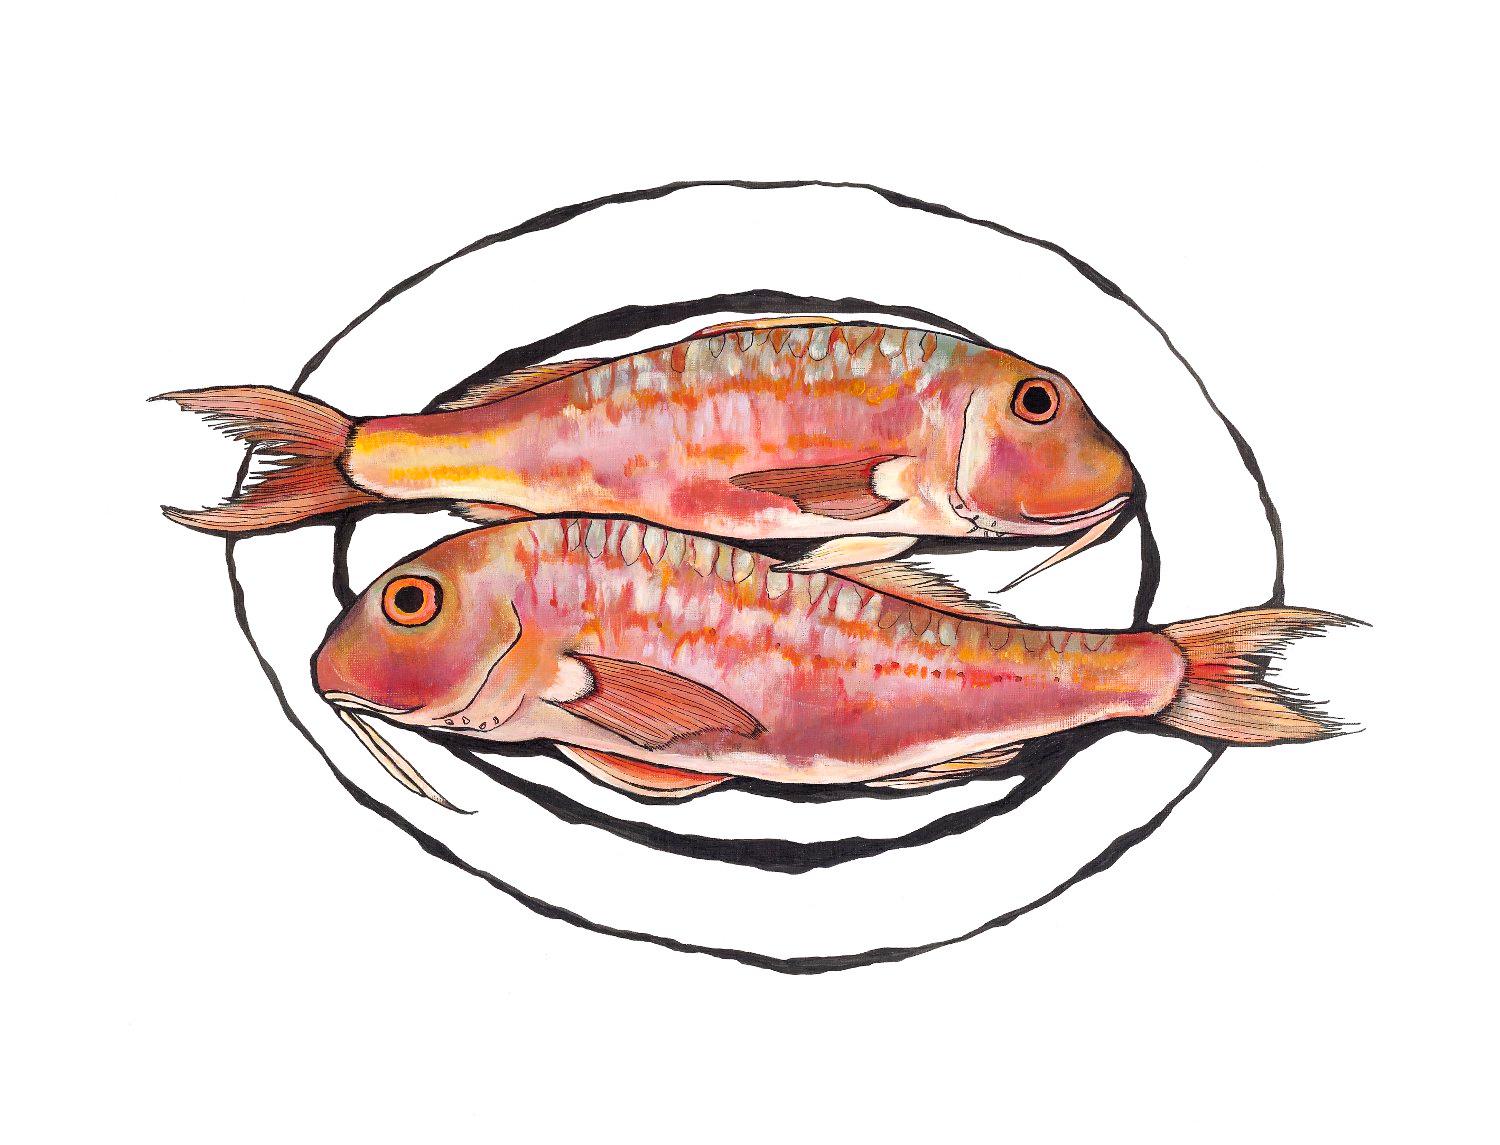 Red Mullet and Crab Diptych
Overall size cm : H100 x W120

Lucy Routh – Crab
Inspired by nature and the beauty found in everyday objects. I combine traditional still life subjects with a contemporary style, achieving bold, vibrant images with a